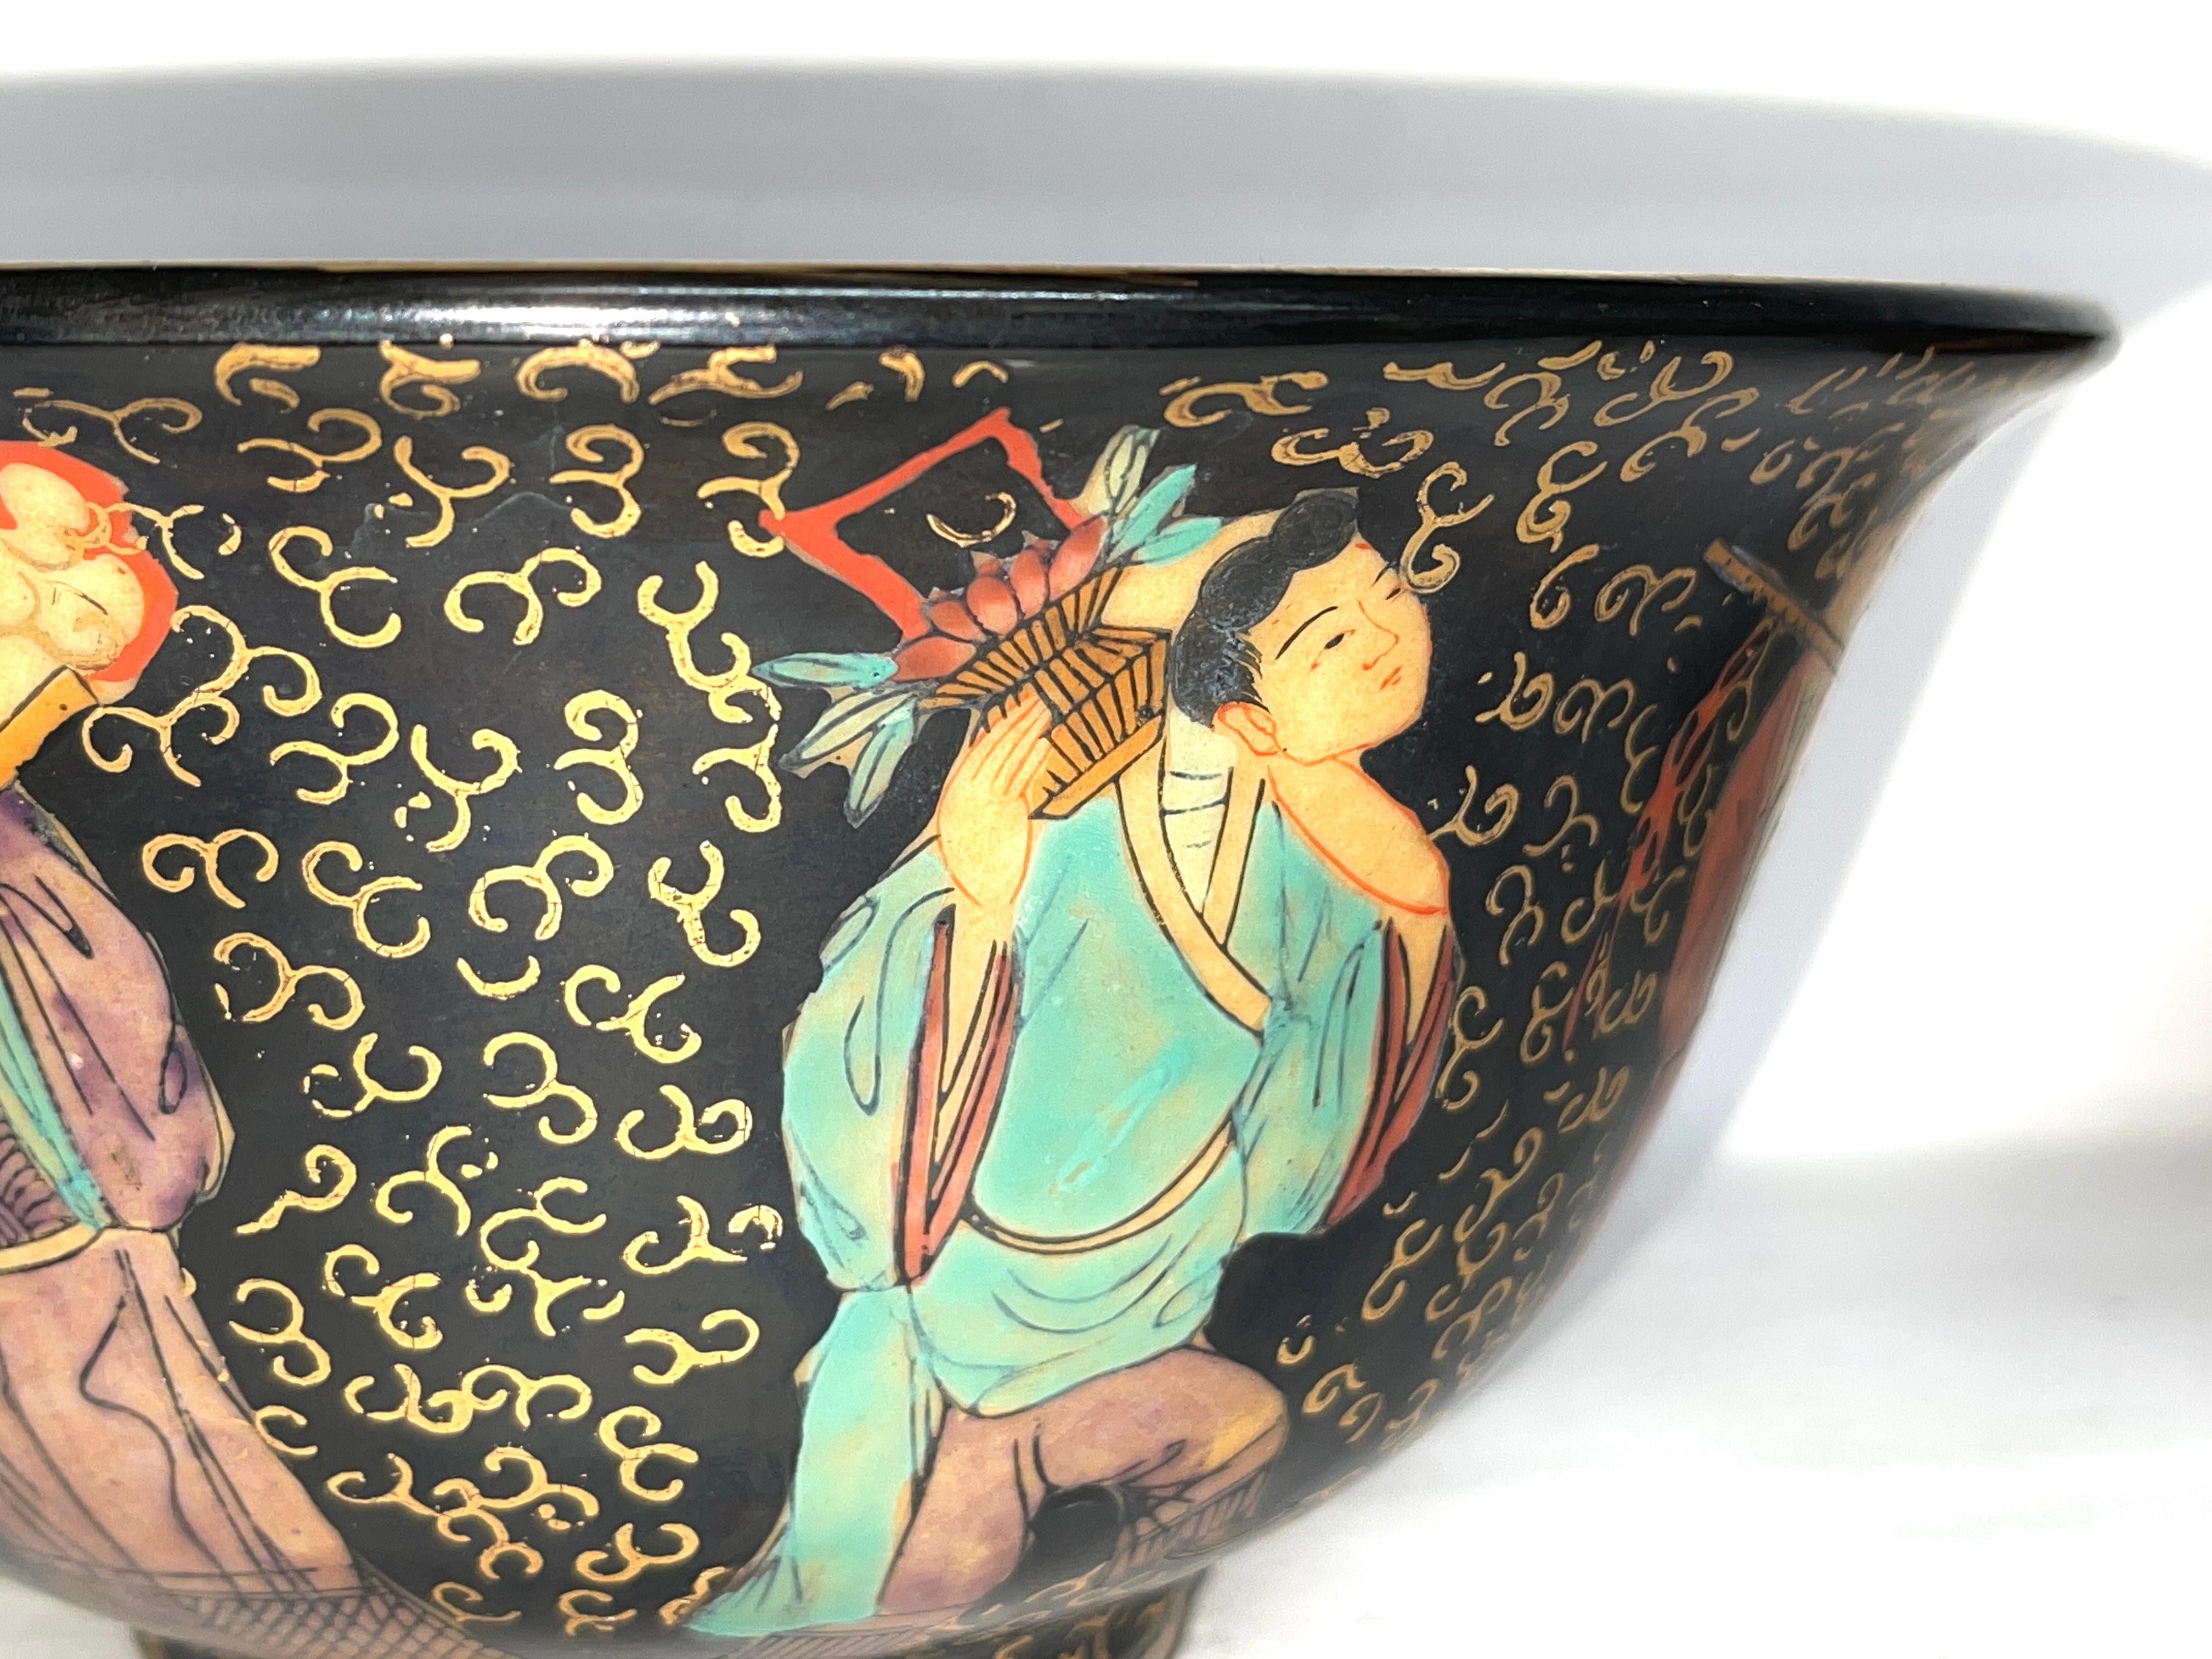 Pair of Antique Chinese Ceramic Bowls, 20th Century, Asian Art For Sale 8